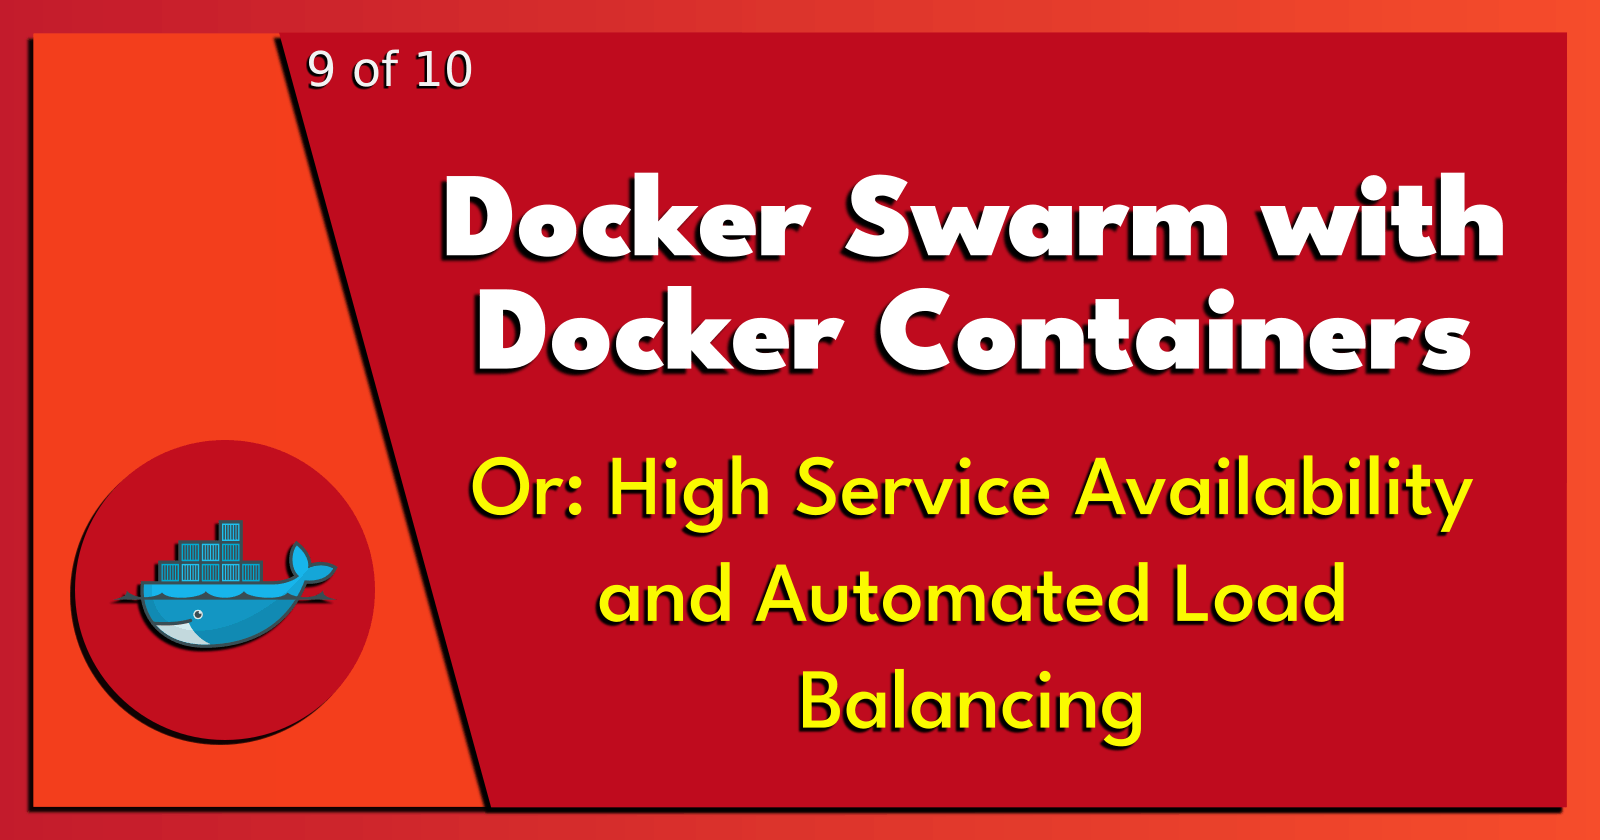 9 of 10: Docker Swarm with Docker Containers.